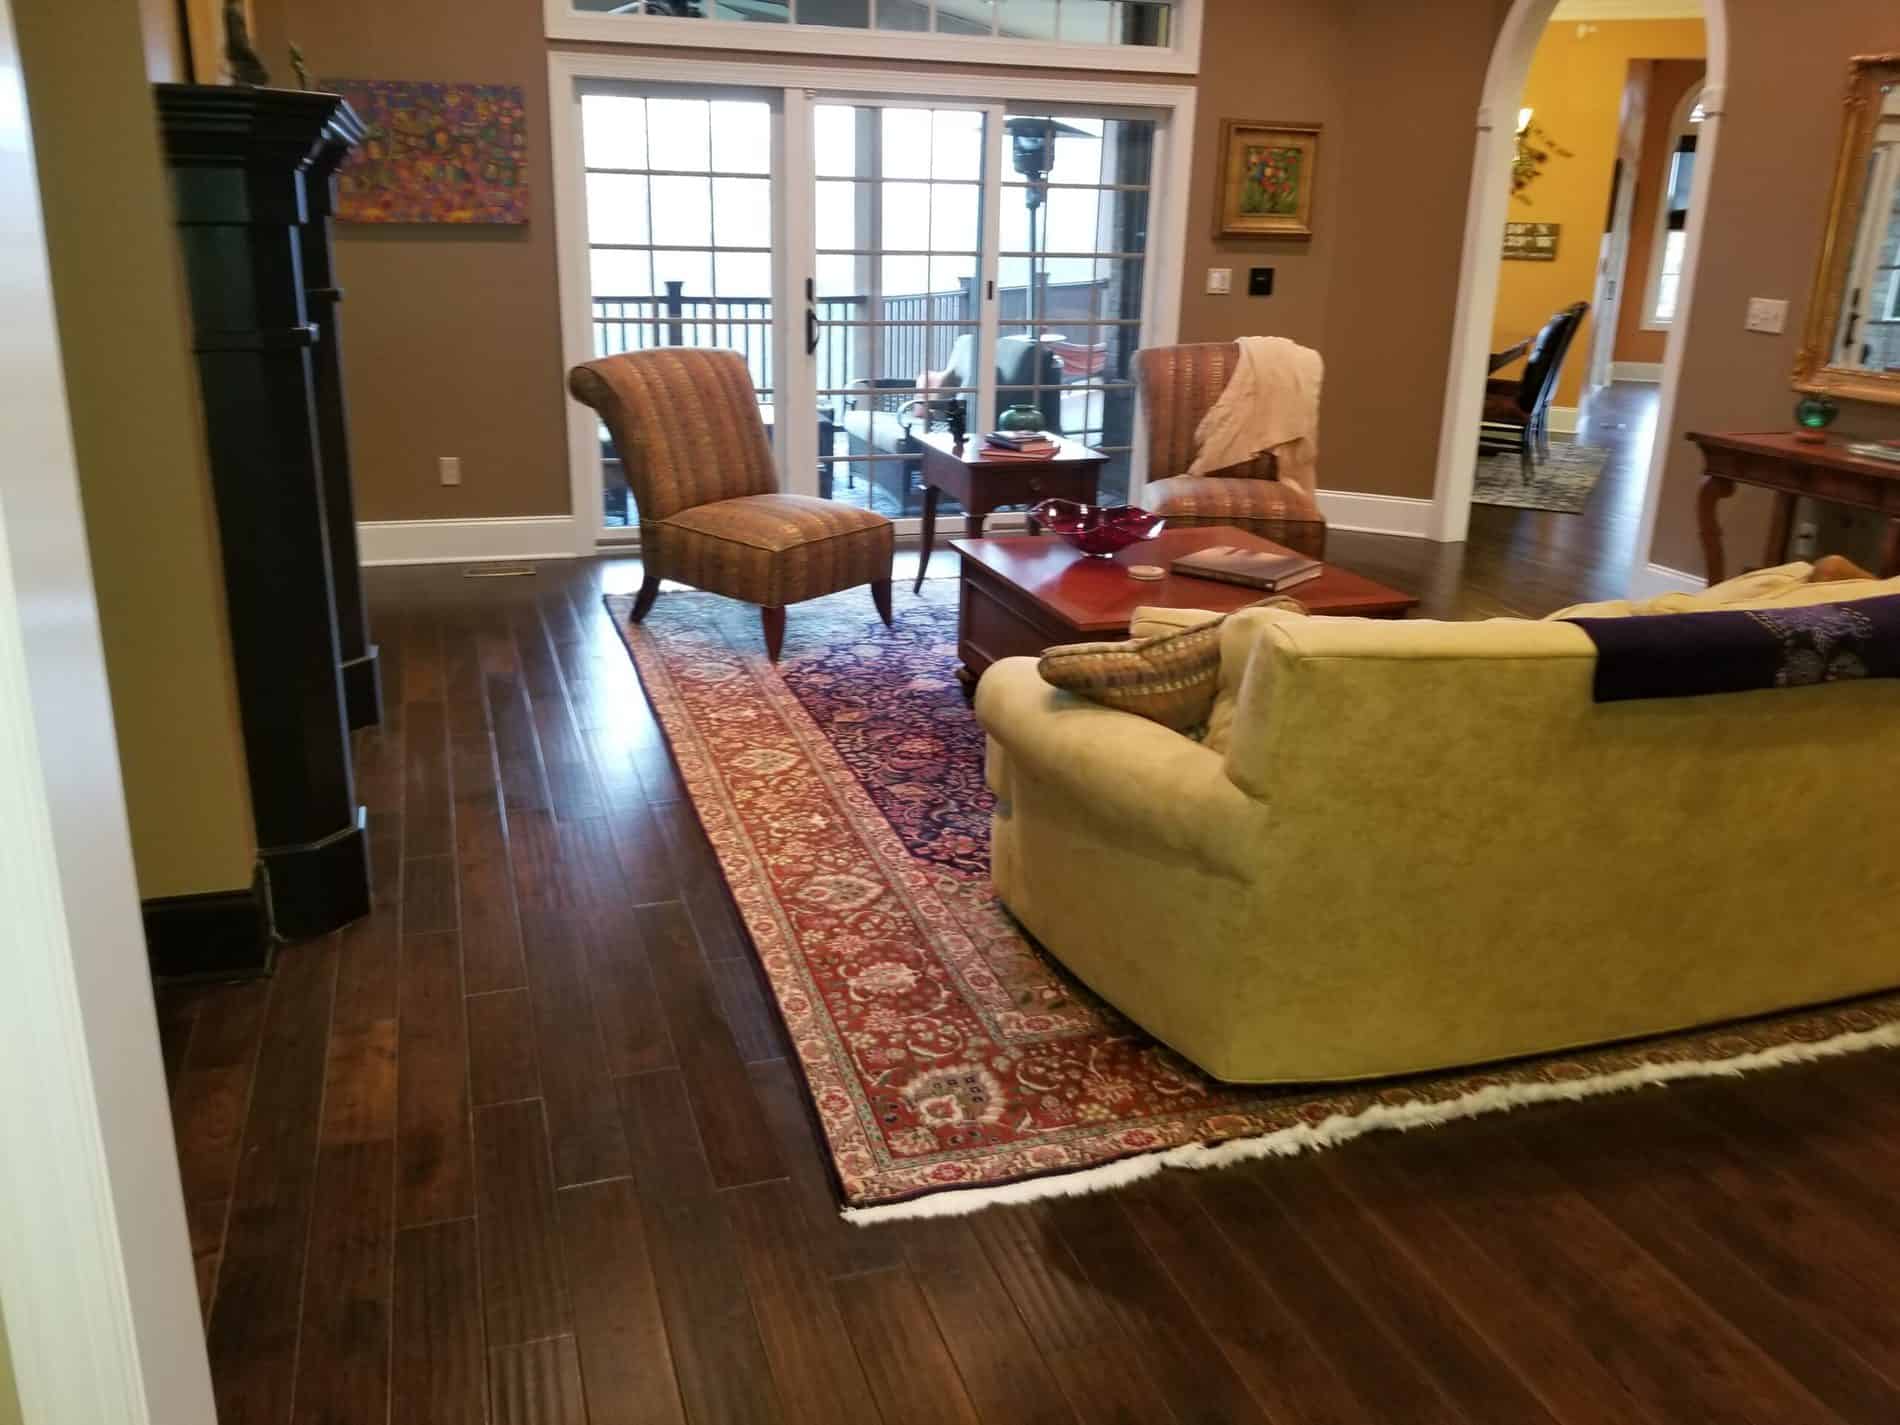 Water Damage extended to Living Room flooring